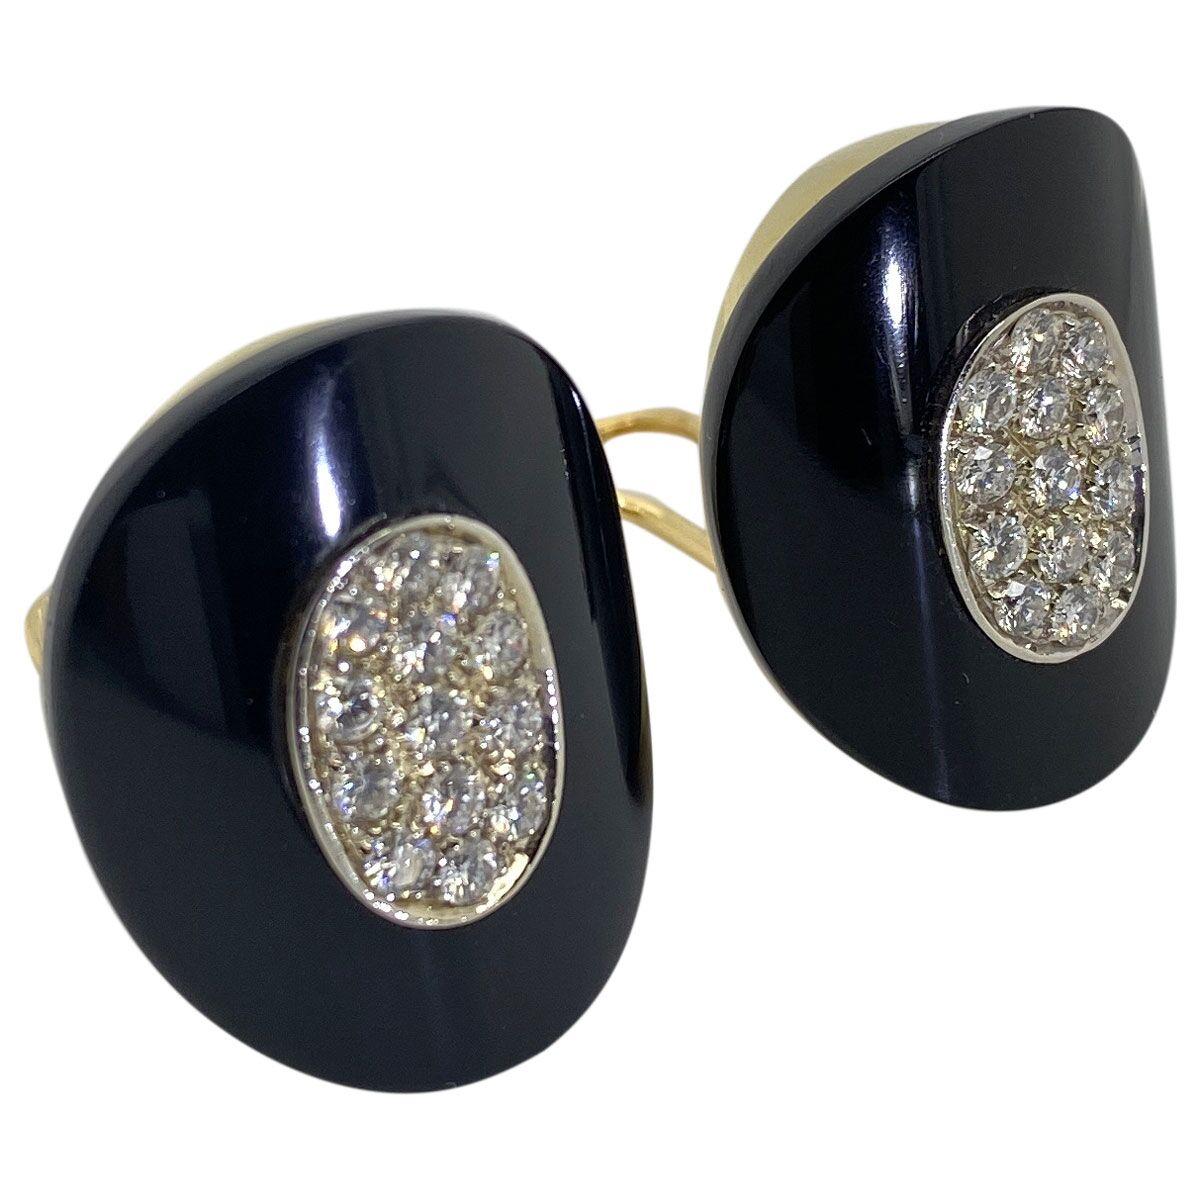 Bold but elegant, so typical of Van Cleef & Arpels with their jewellery designs. These ear clips are perfect for all occasions, enough sparkle for a formal evening event or they could be worn during the day for business meetings. Jewellery that can